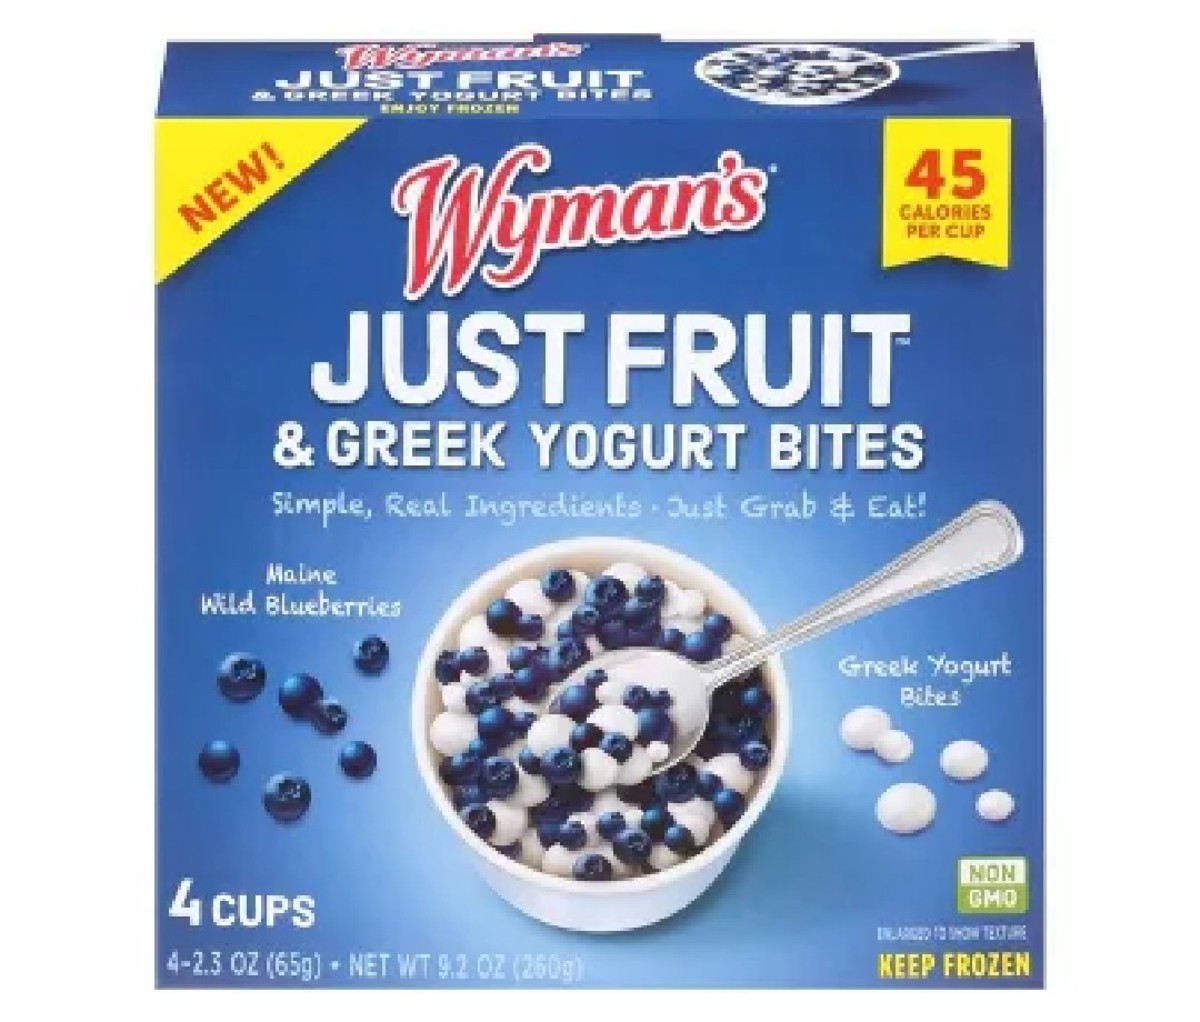 Wyman’s Just Fruit is a ready-to-eat snack that’s only 45 calories and provides approximately ¼ cup of fruit per serving. It's just as nutritious as fresh fruit and is convenient to eat. Wyman’s utilizes a freezing technique to combine their Maine Wild Blueberries with Greek Yogurt Bites.